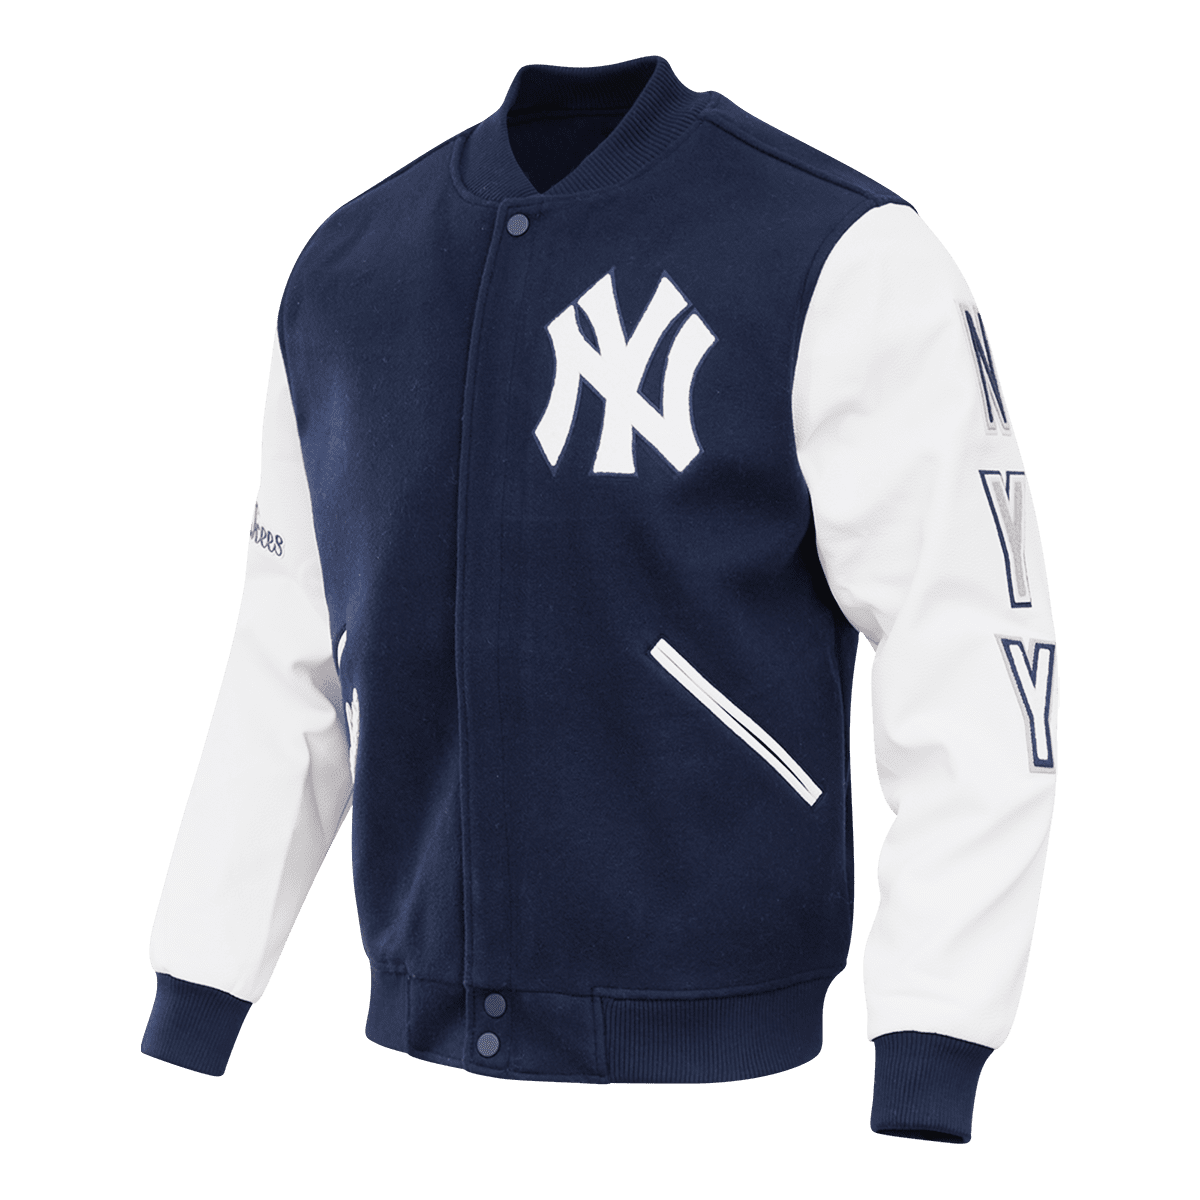 NY Yankees Letterman Red and Blue Jacket